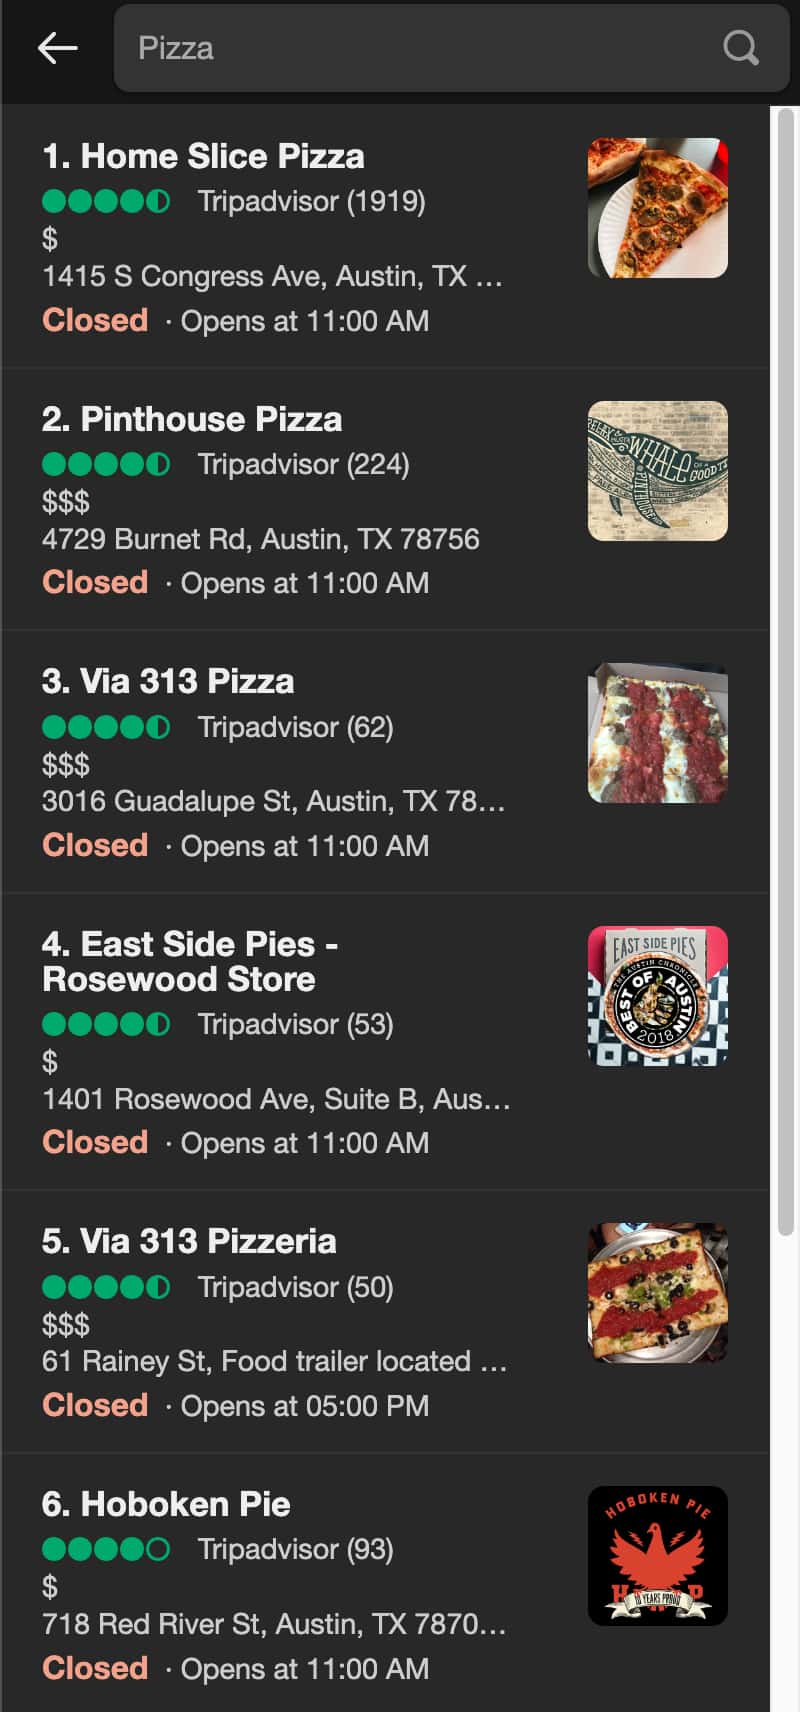 Example with q: Pizza, and Austin, TX, US as a location